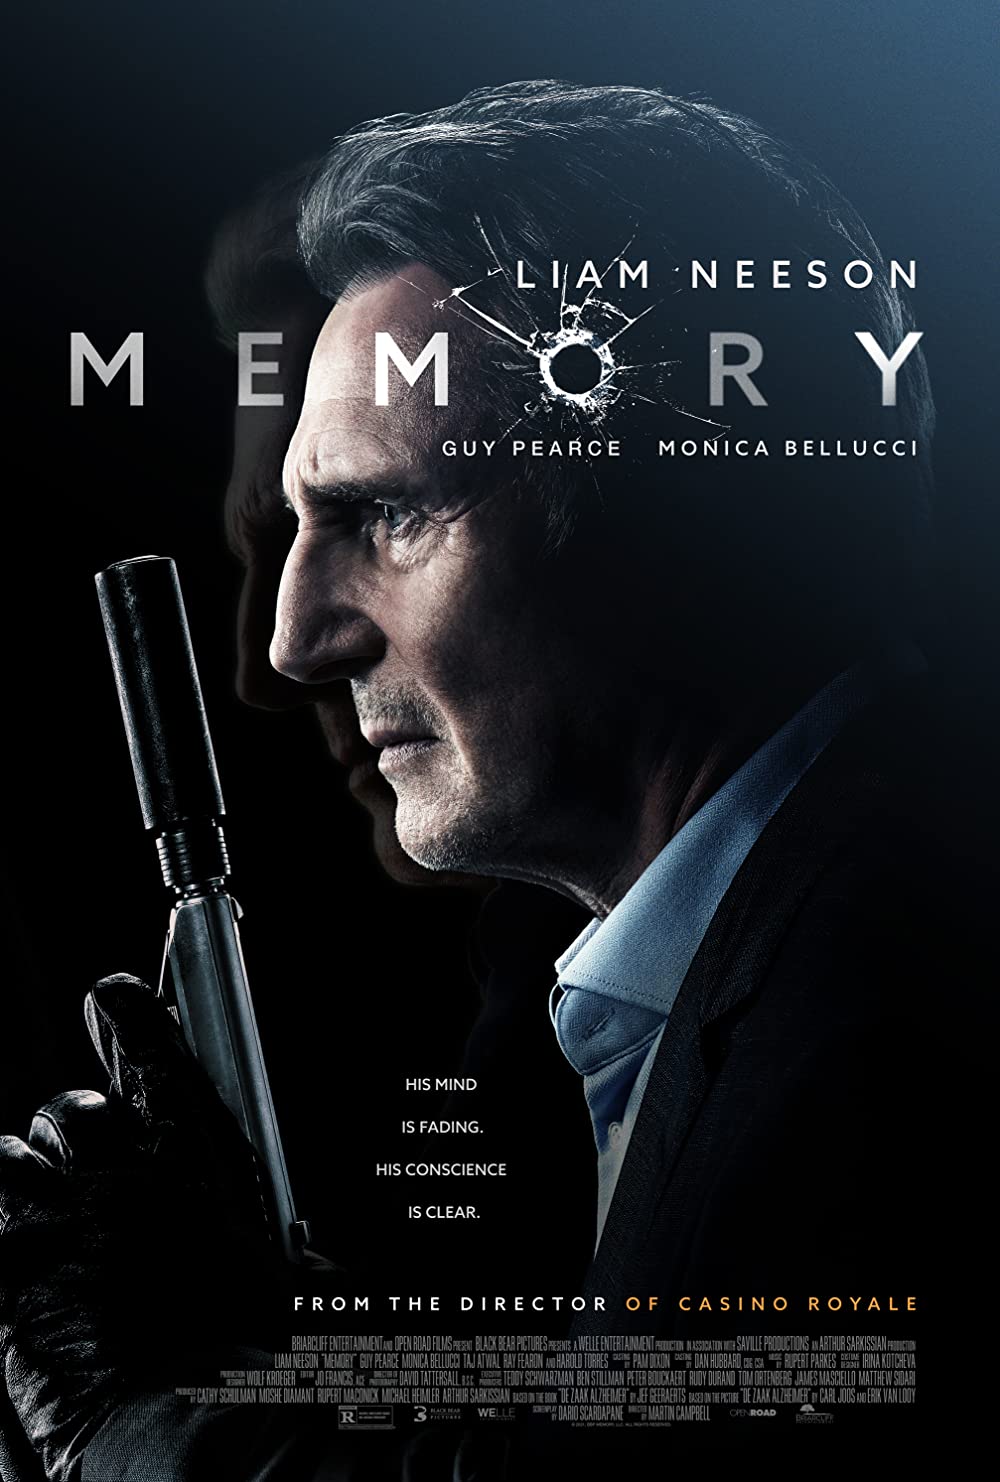 𝐎𝐟𝐟𝐢𝐜𝐢𝐚𝐥!! Watch Memory (2022) Free Online Streaming 𝐀𝐭 𝐇𝐨𝐦𝐞 Film Daily